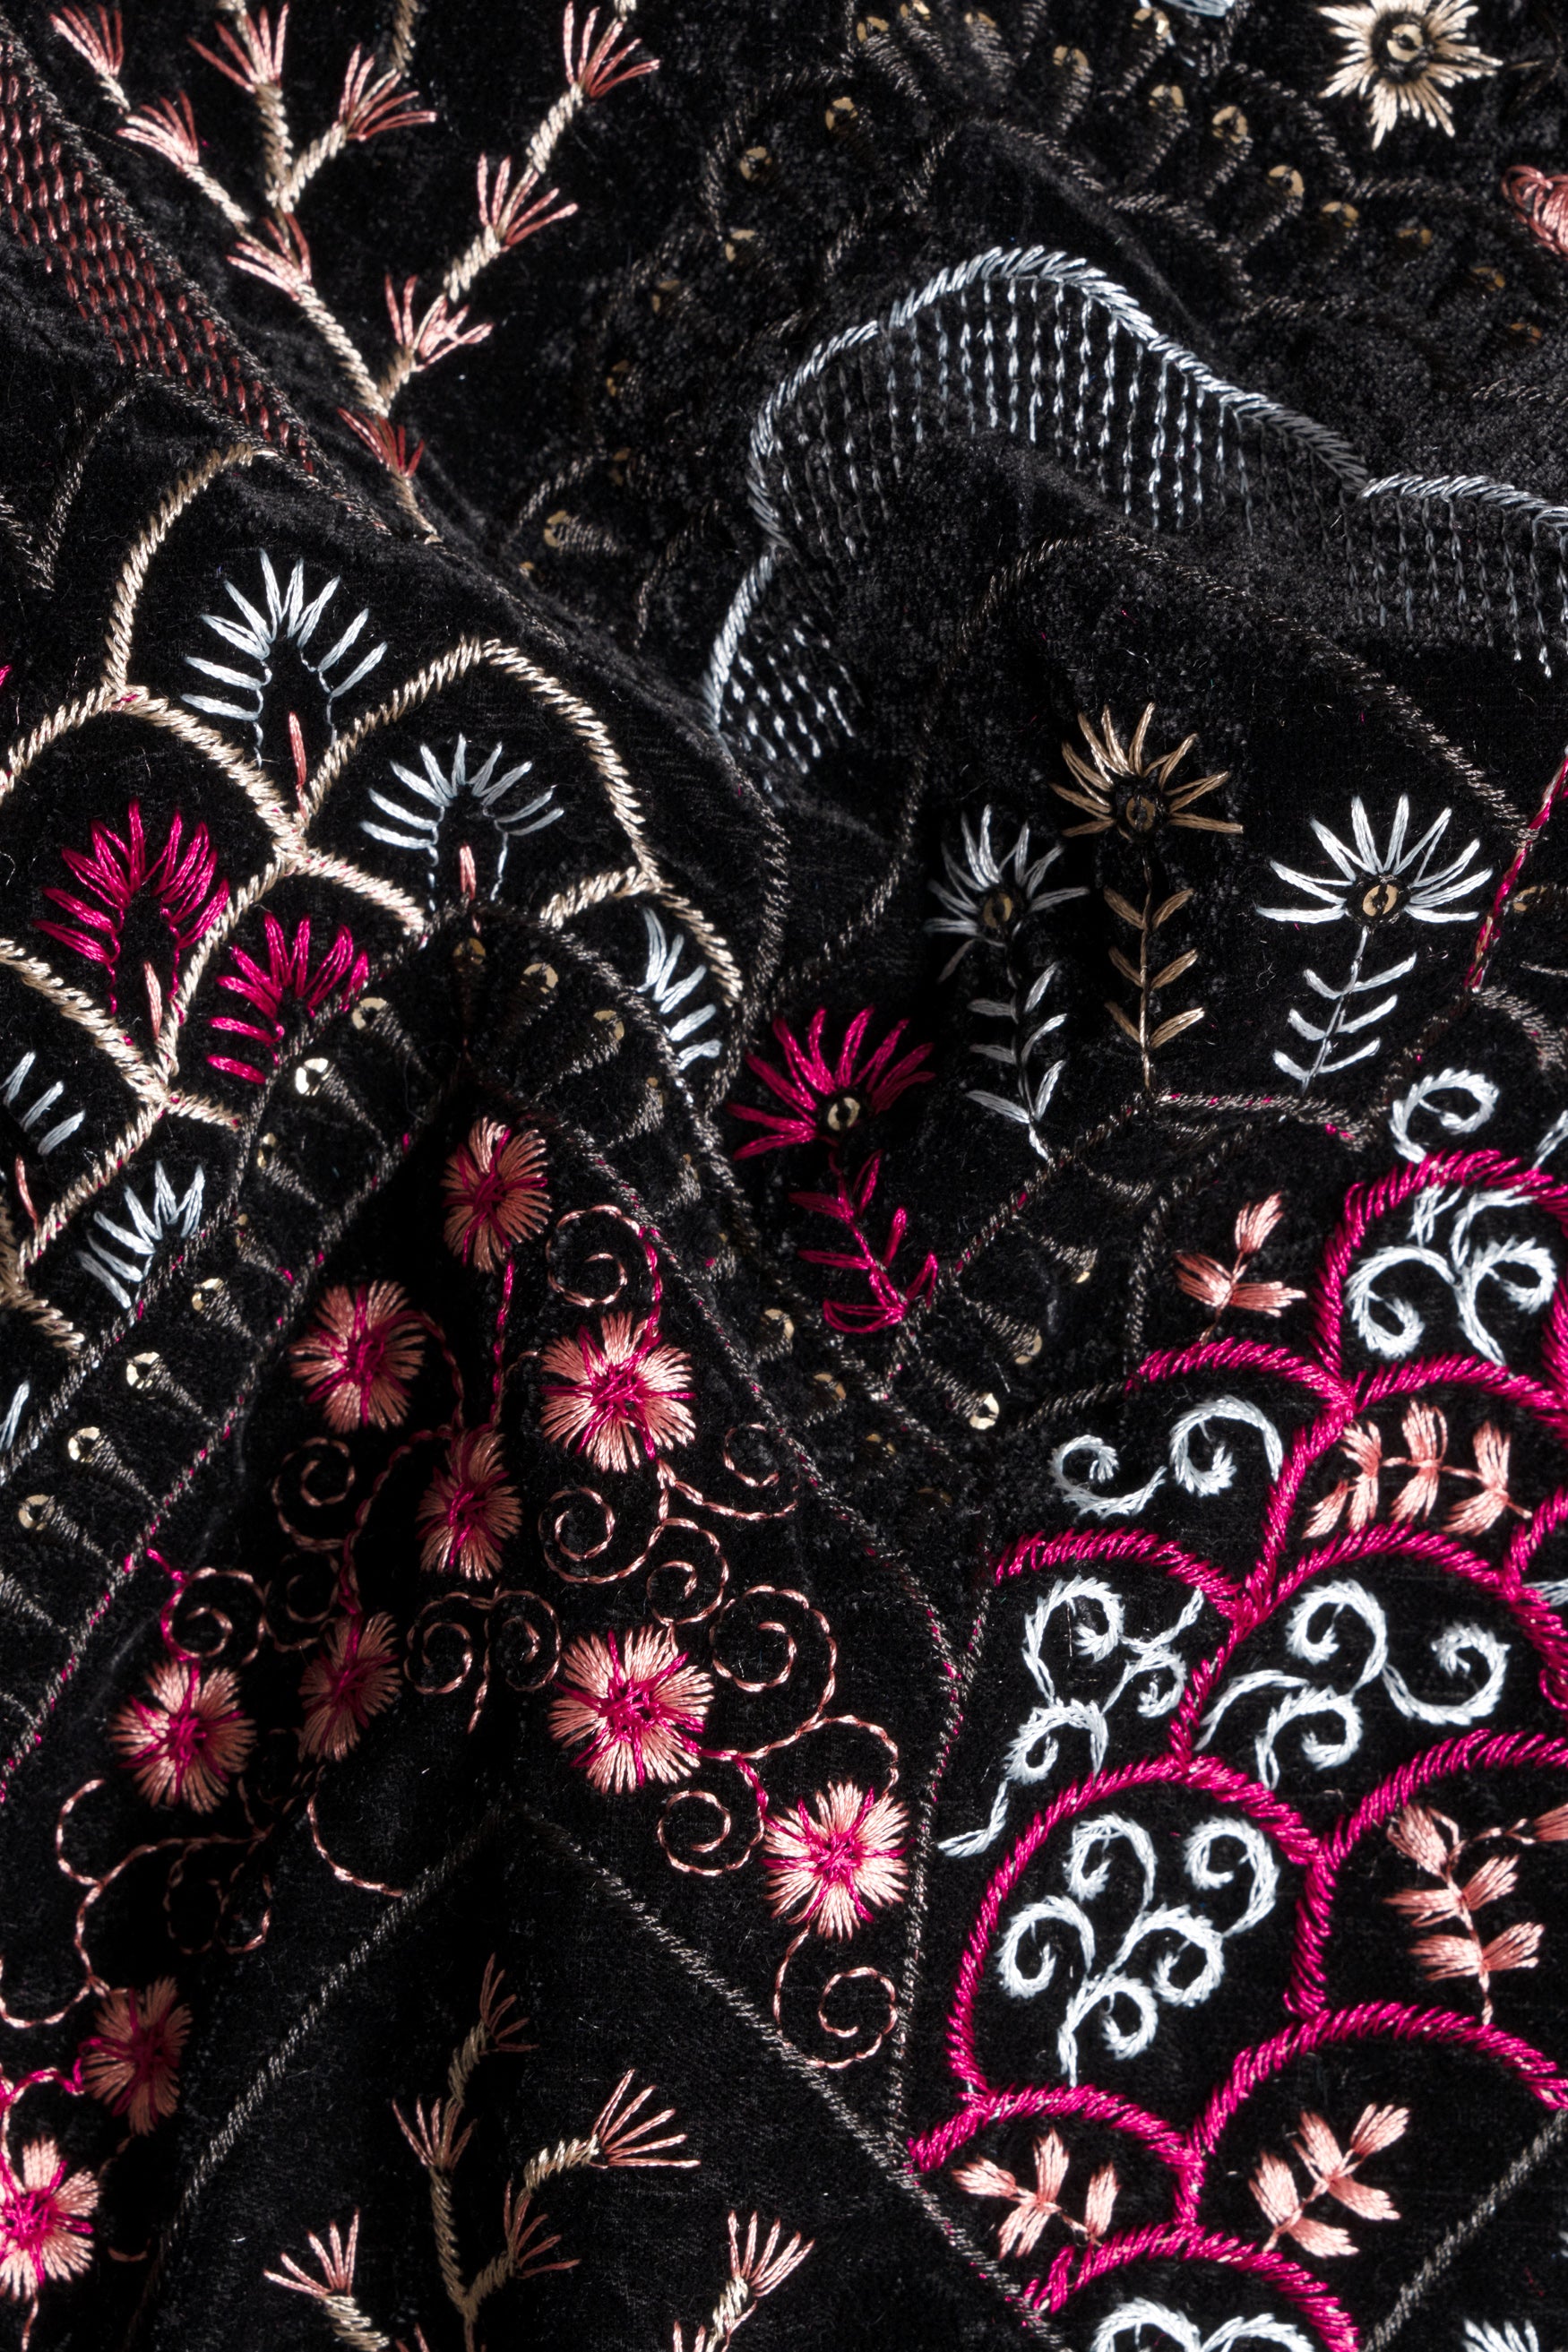 Jade Black Multicolour Floral Thread and Sequin Embroidered Designer Nehru Jacket WC3470-36,  WC3470-38,  WC3470-40,  WC3470-42,  WC3470-44,  WC3470-46,  WC3470-48,  WC3470-50,  WC3470-52,  WC3470-54,  WC3470-56,  WC3470-58,  WC3470-60